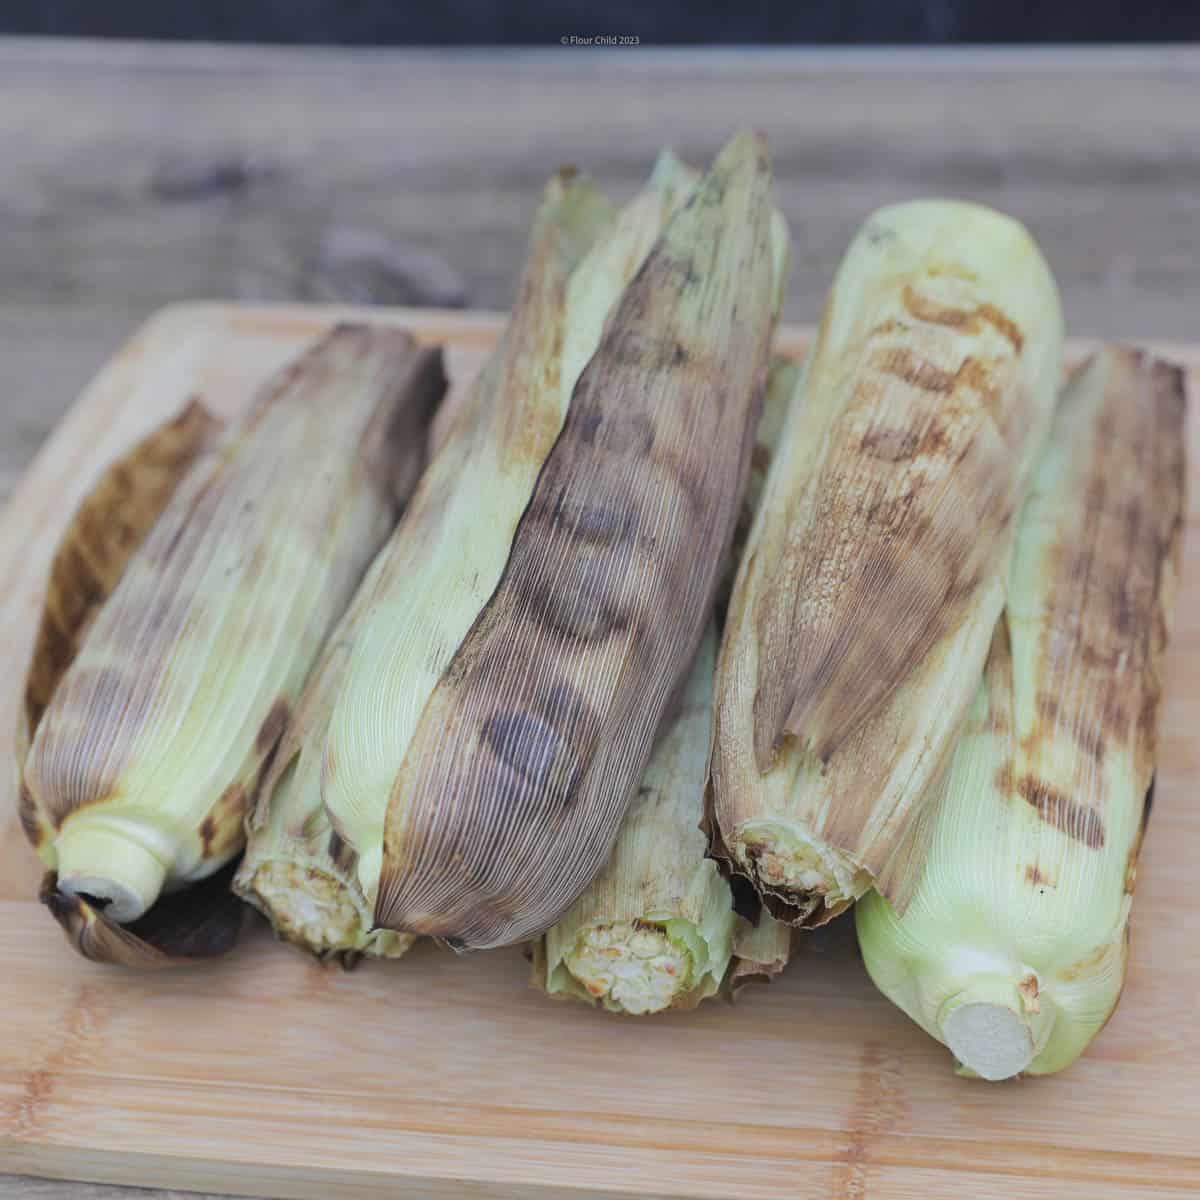 Corn on the cob just off the grill with the husks still on.